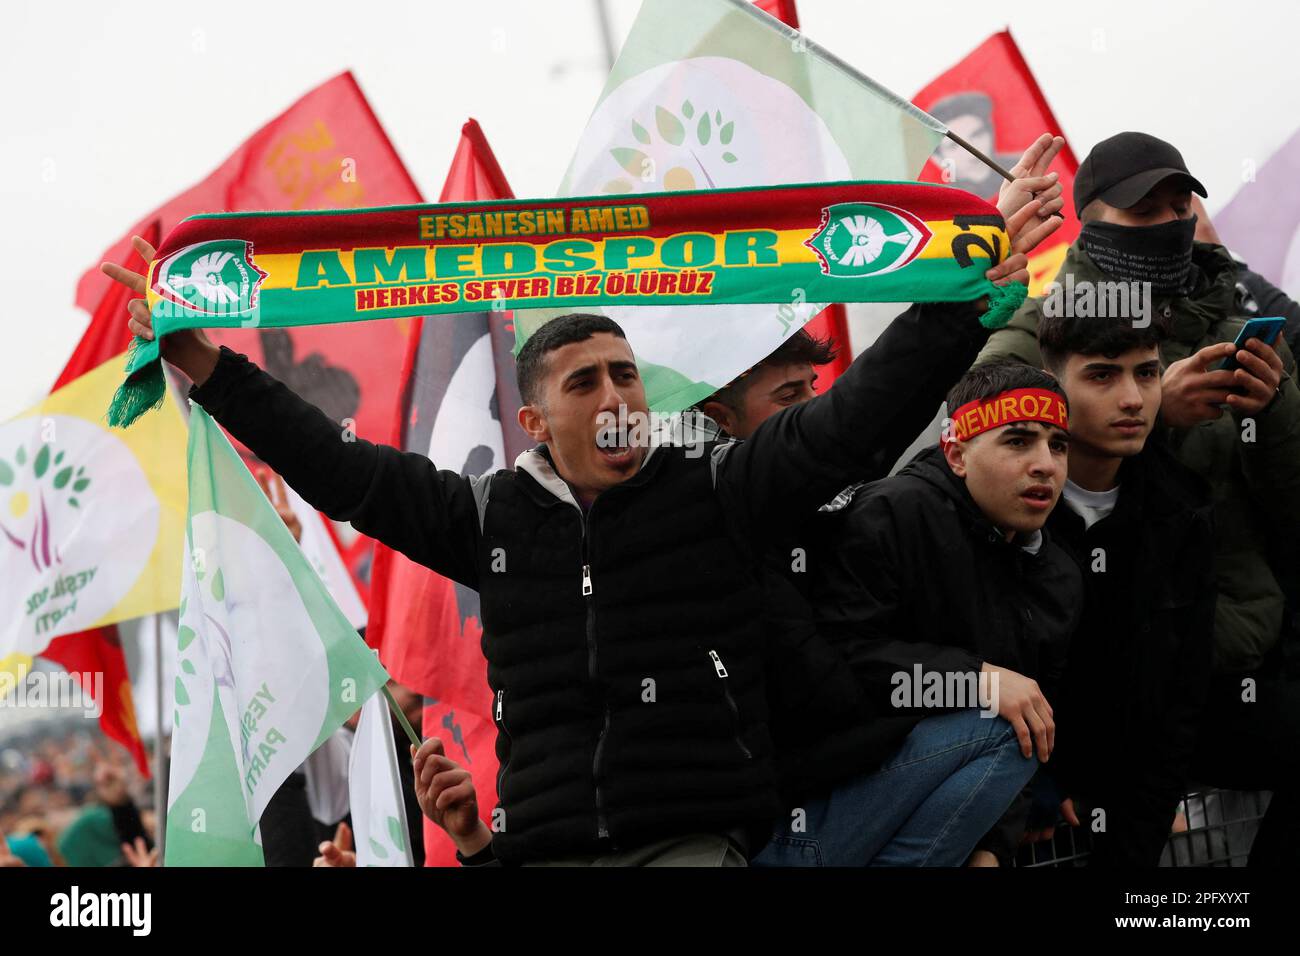 A man shouts slogans as he holds a scarf of Amedspor soccer team during a rally to celebrate Nowruz, which marks the arrival of spring, in Istanbul, Turkey March 19, 2023. REUTERS/Murad Sezer Stock Photo